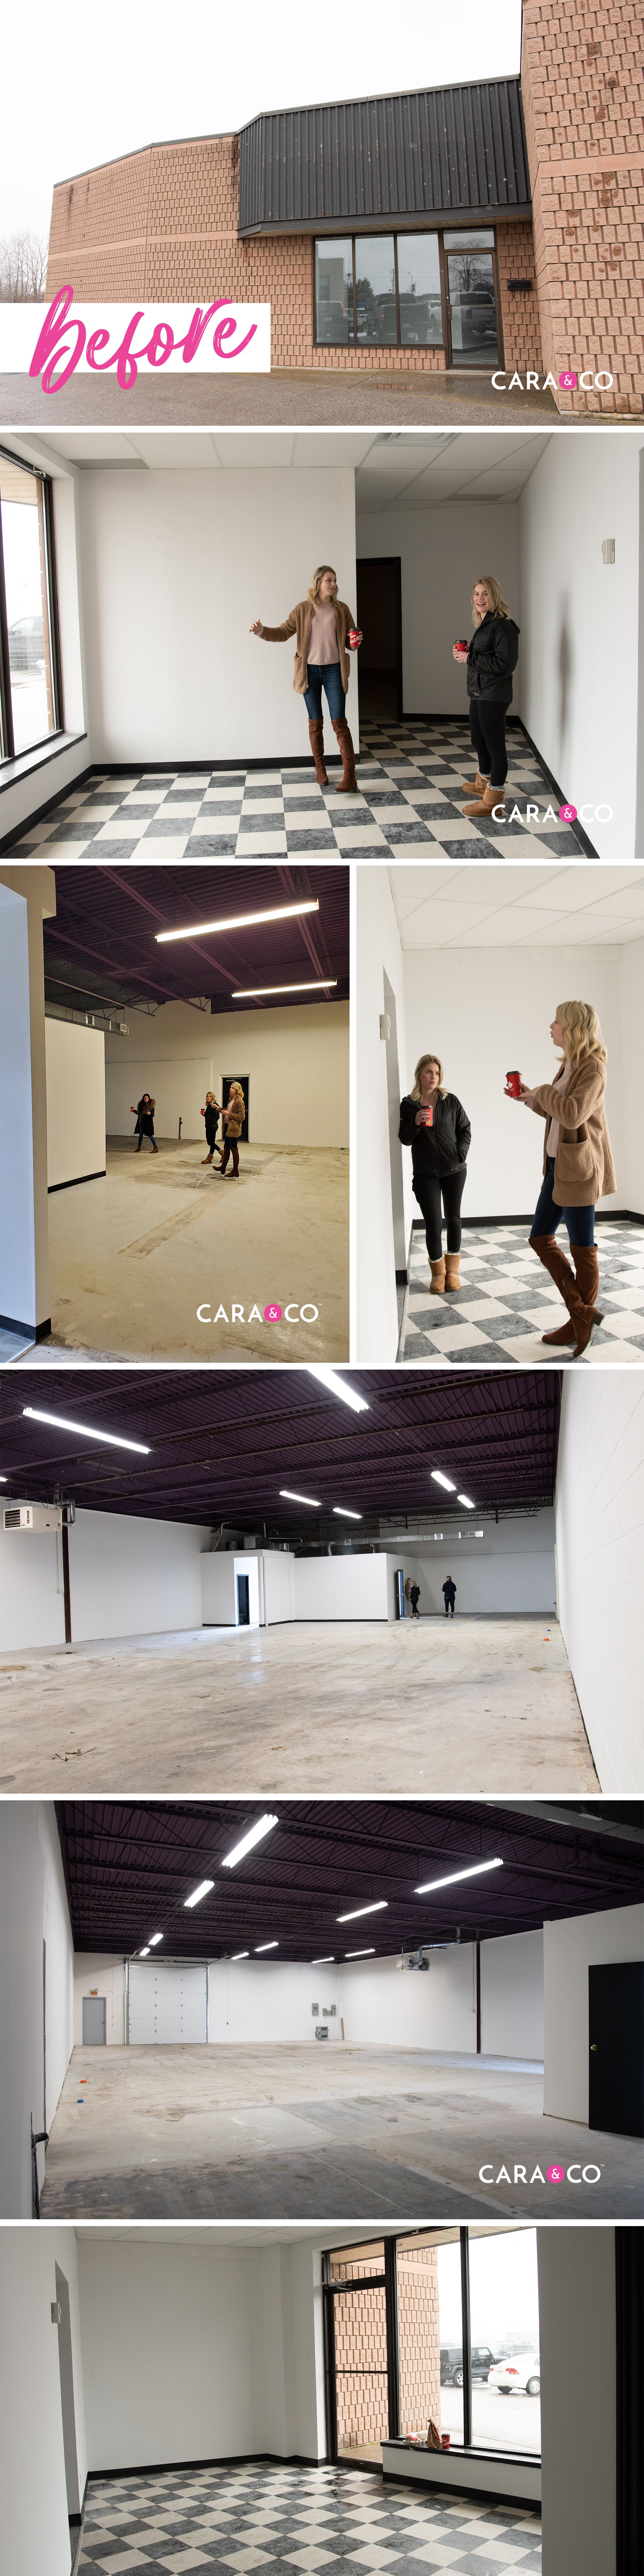 Our Big Move: Why, When and How we Moved Shop - Cara & Co Blog Posts